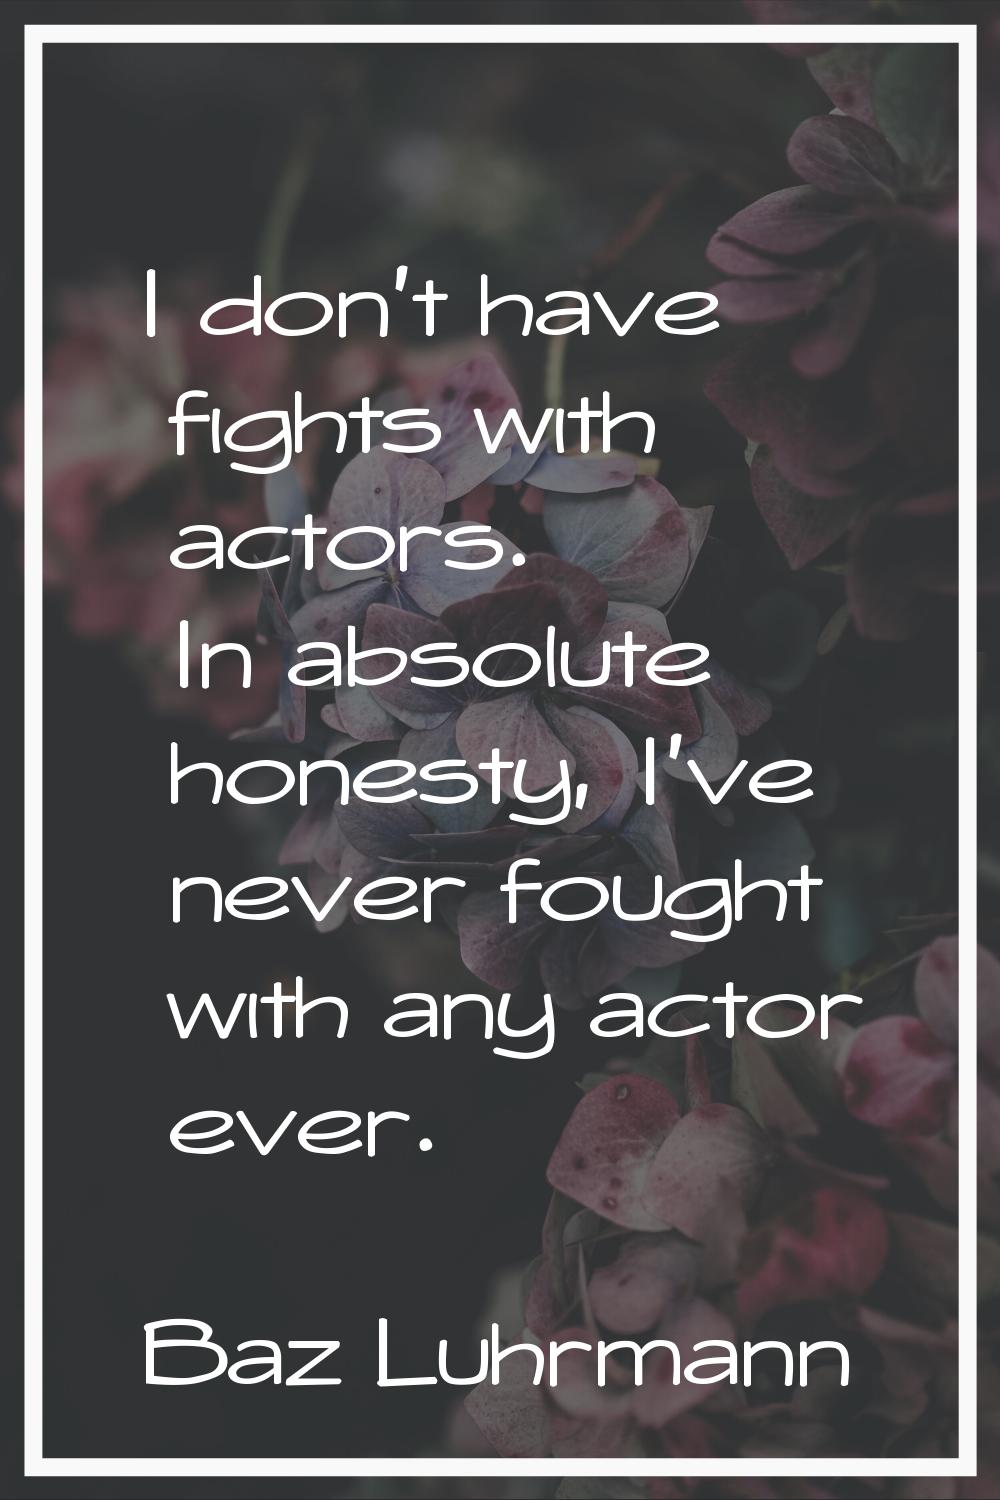 I don't have fights with actors. In absolute honesty, I've never fought with any actor ever.